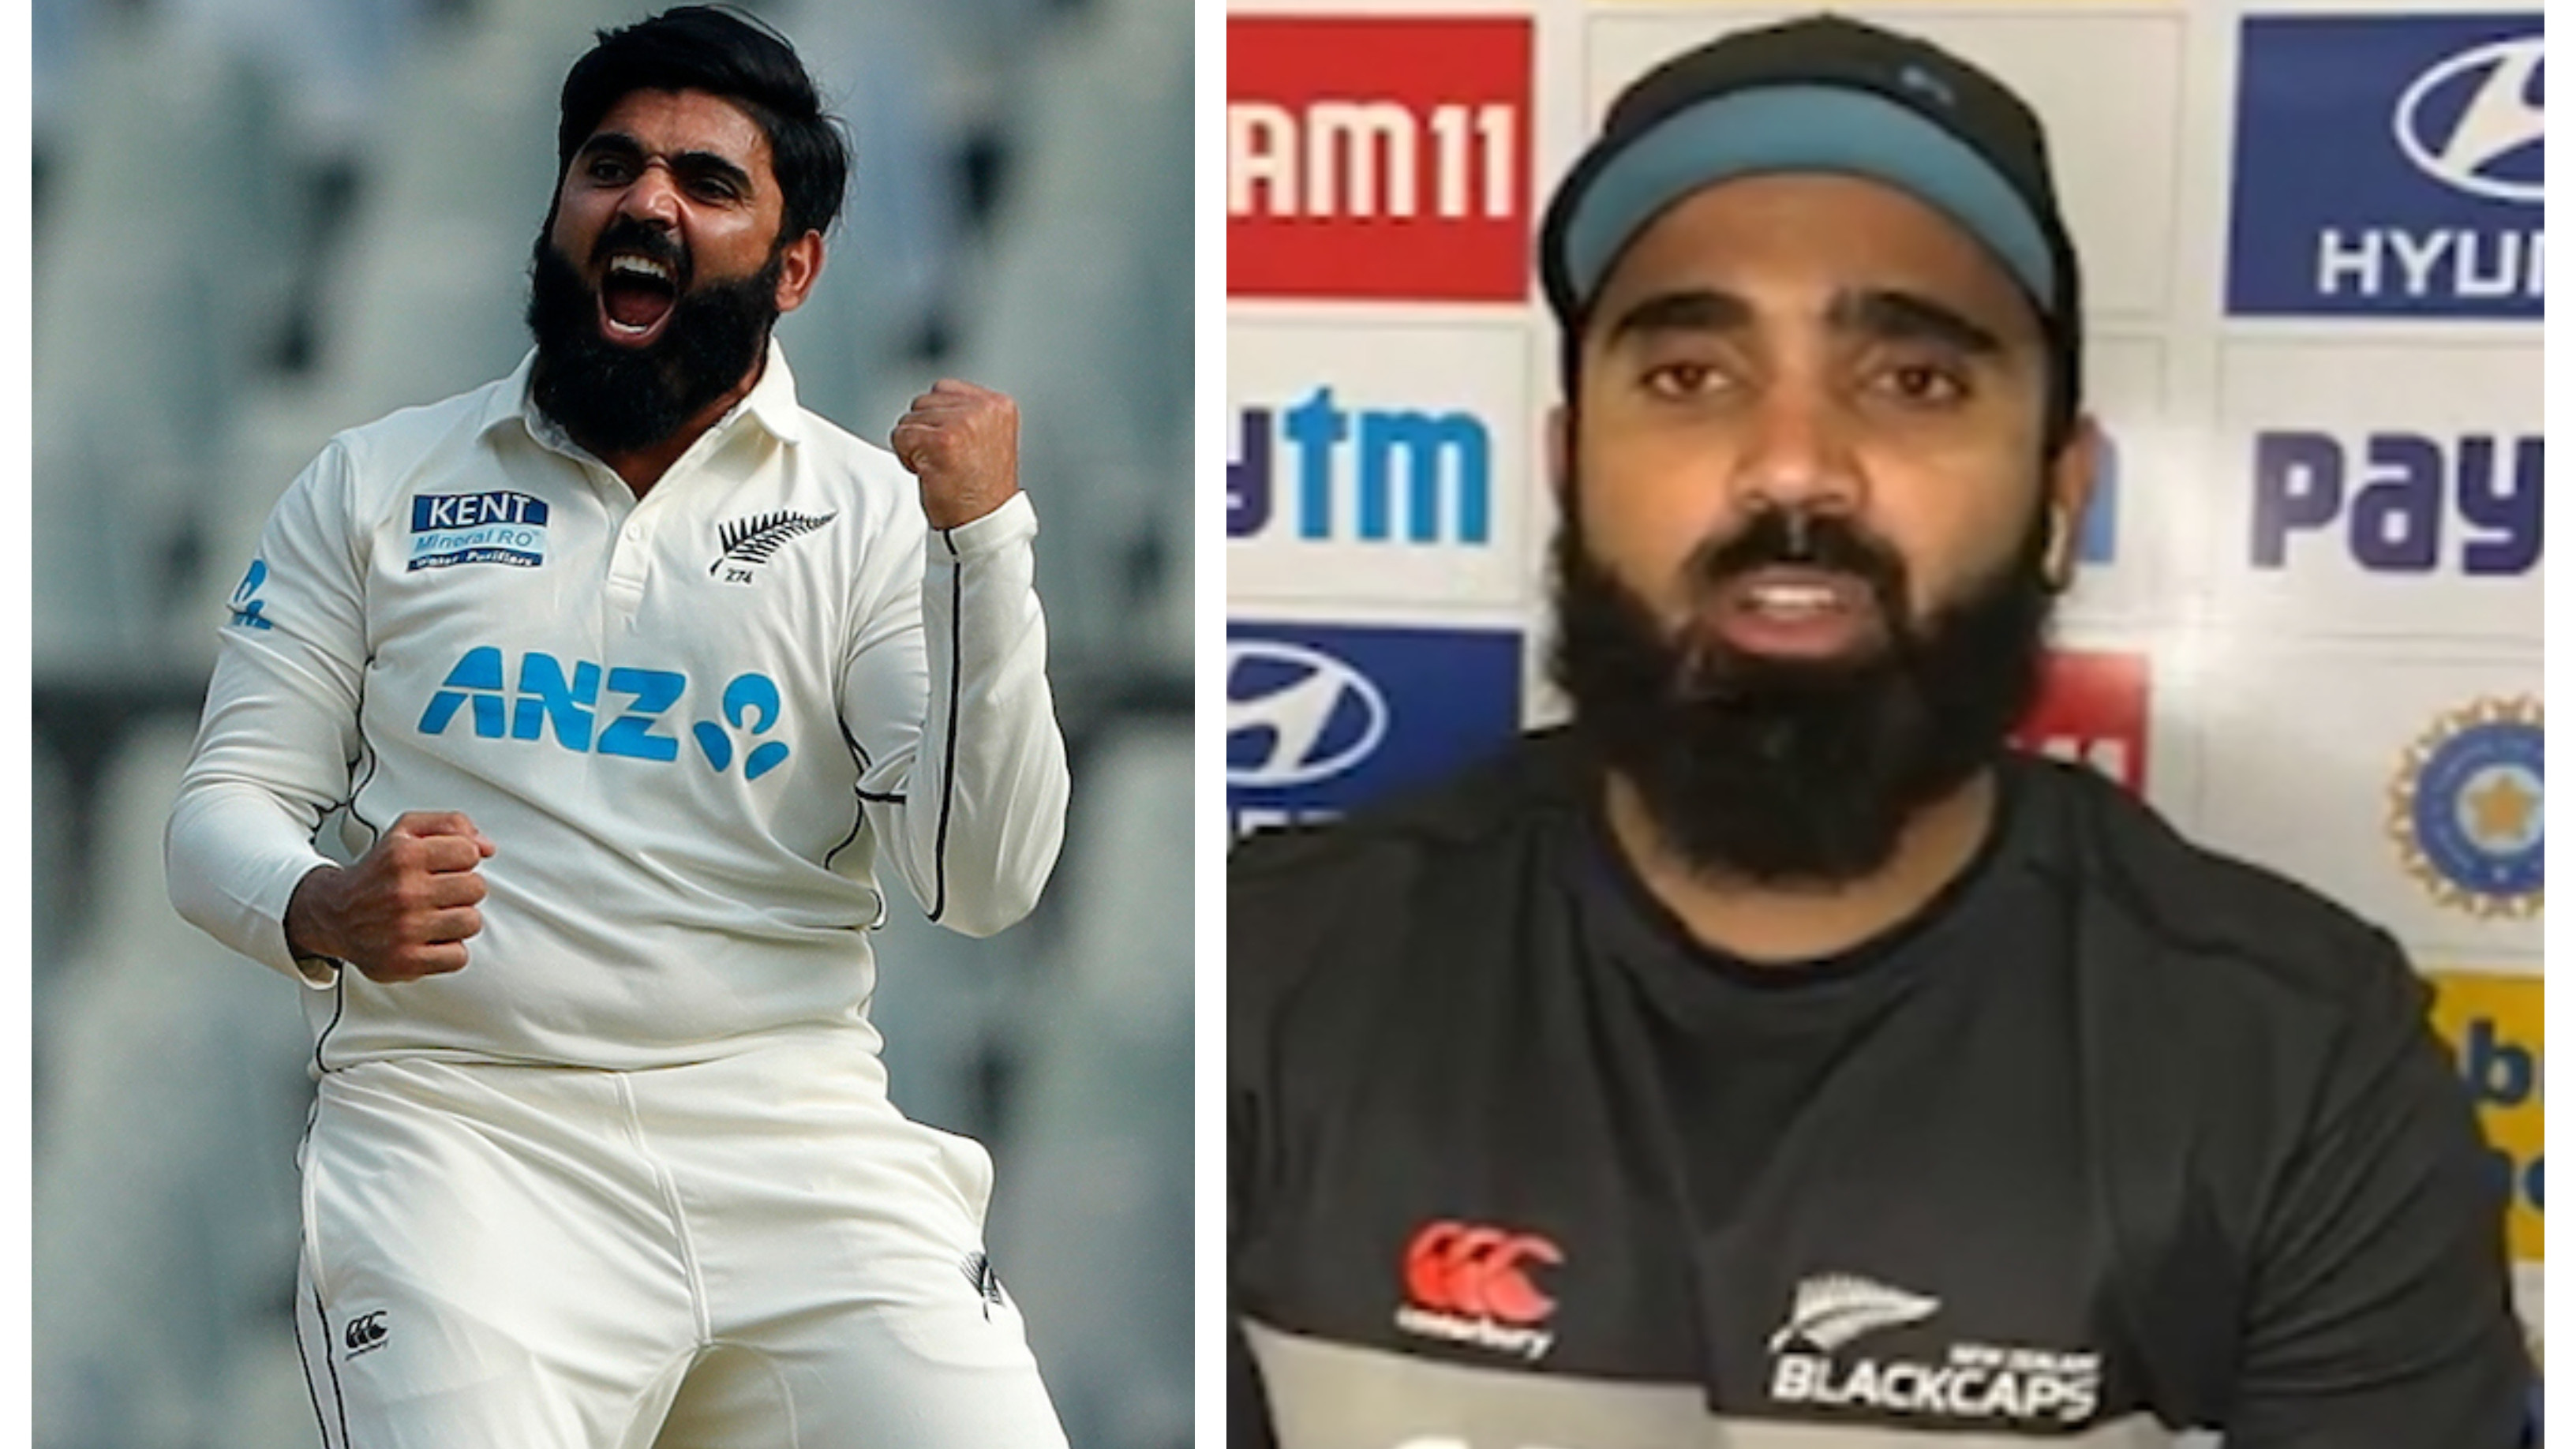 IND v NZ 2021: “One of the greatest cricketing days of my life”, says Ajaz Patel after taking all 10 Indian wickets